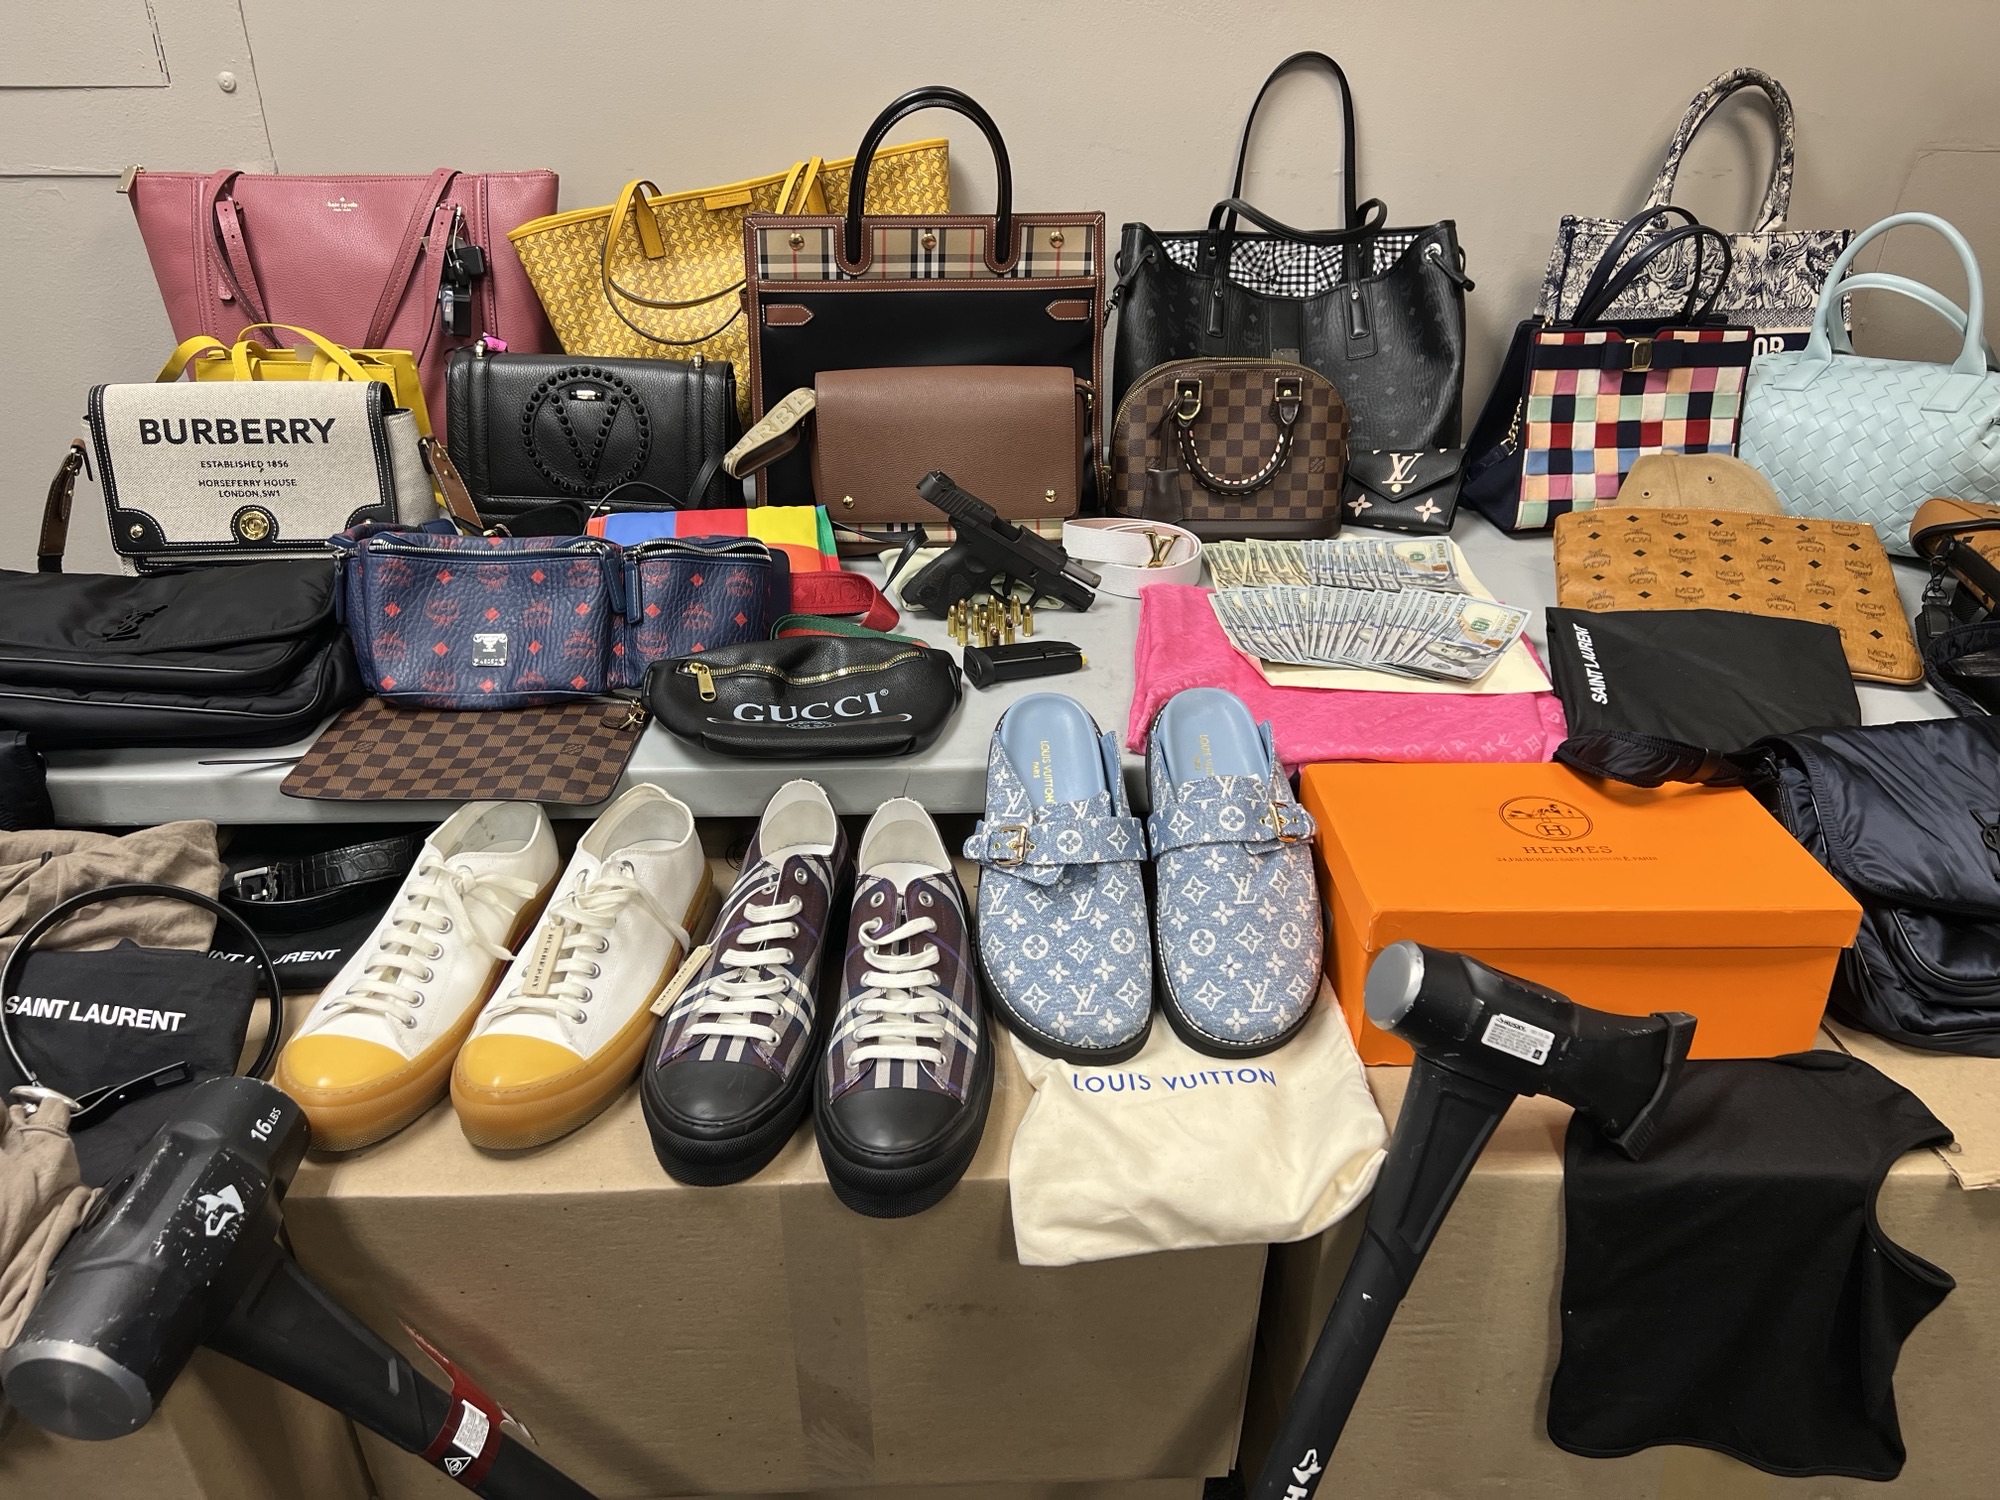 Robbers make off with over $400,000 in Louis Vuitton merchandise